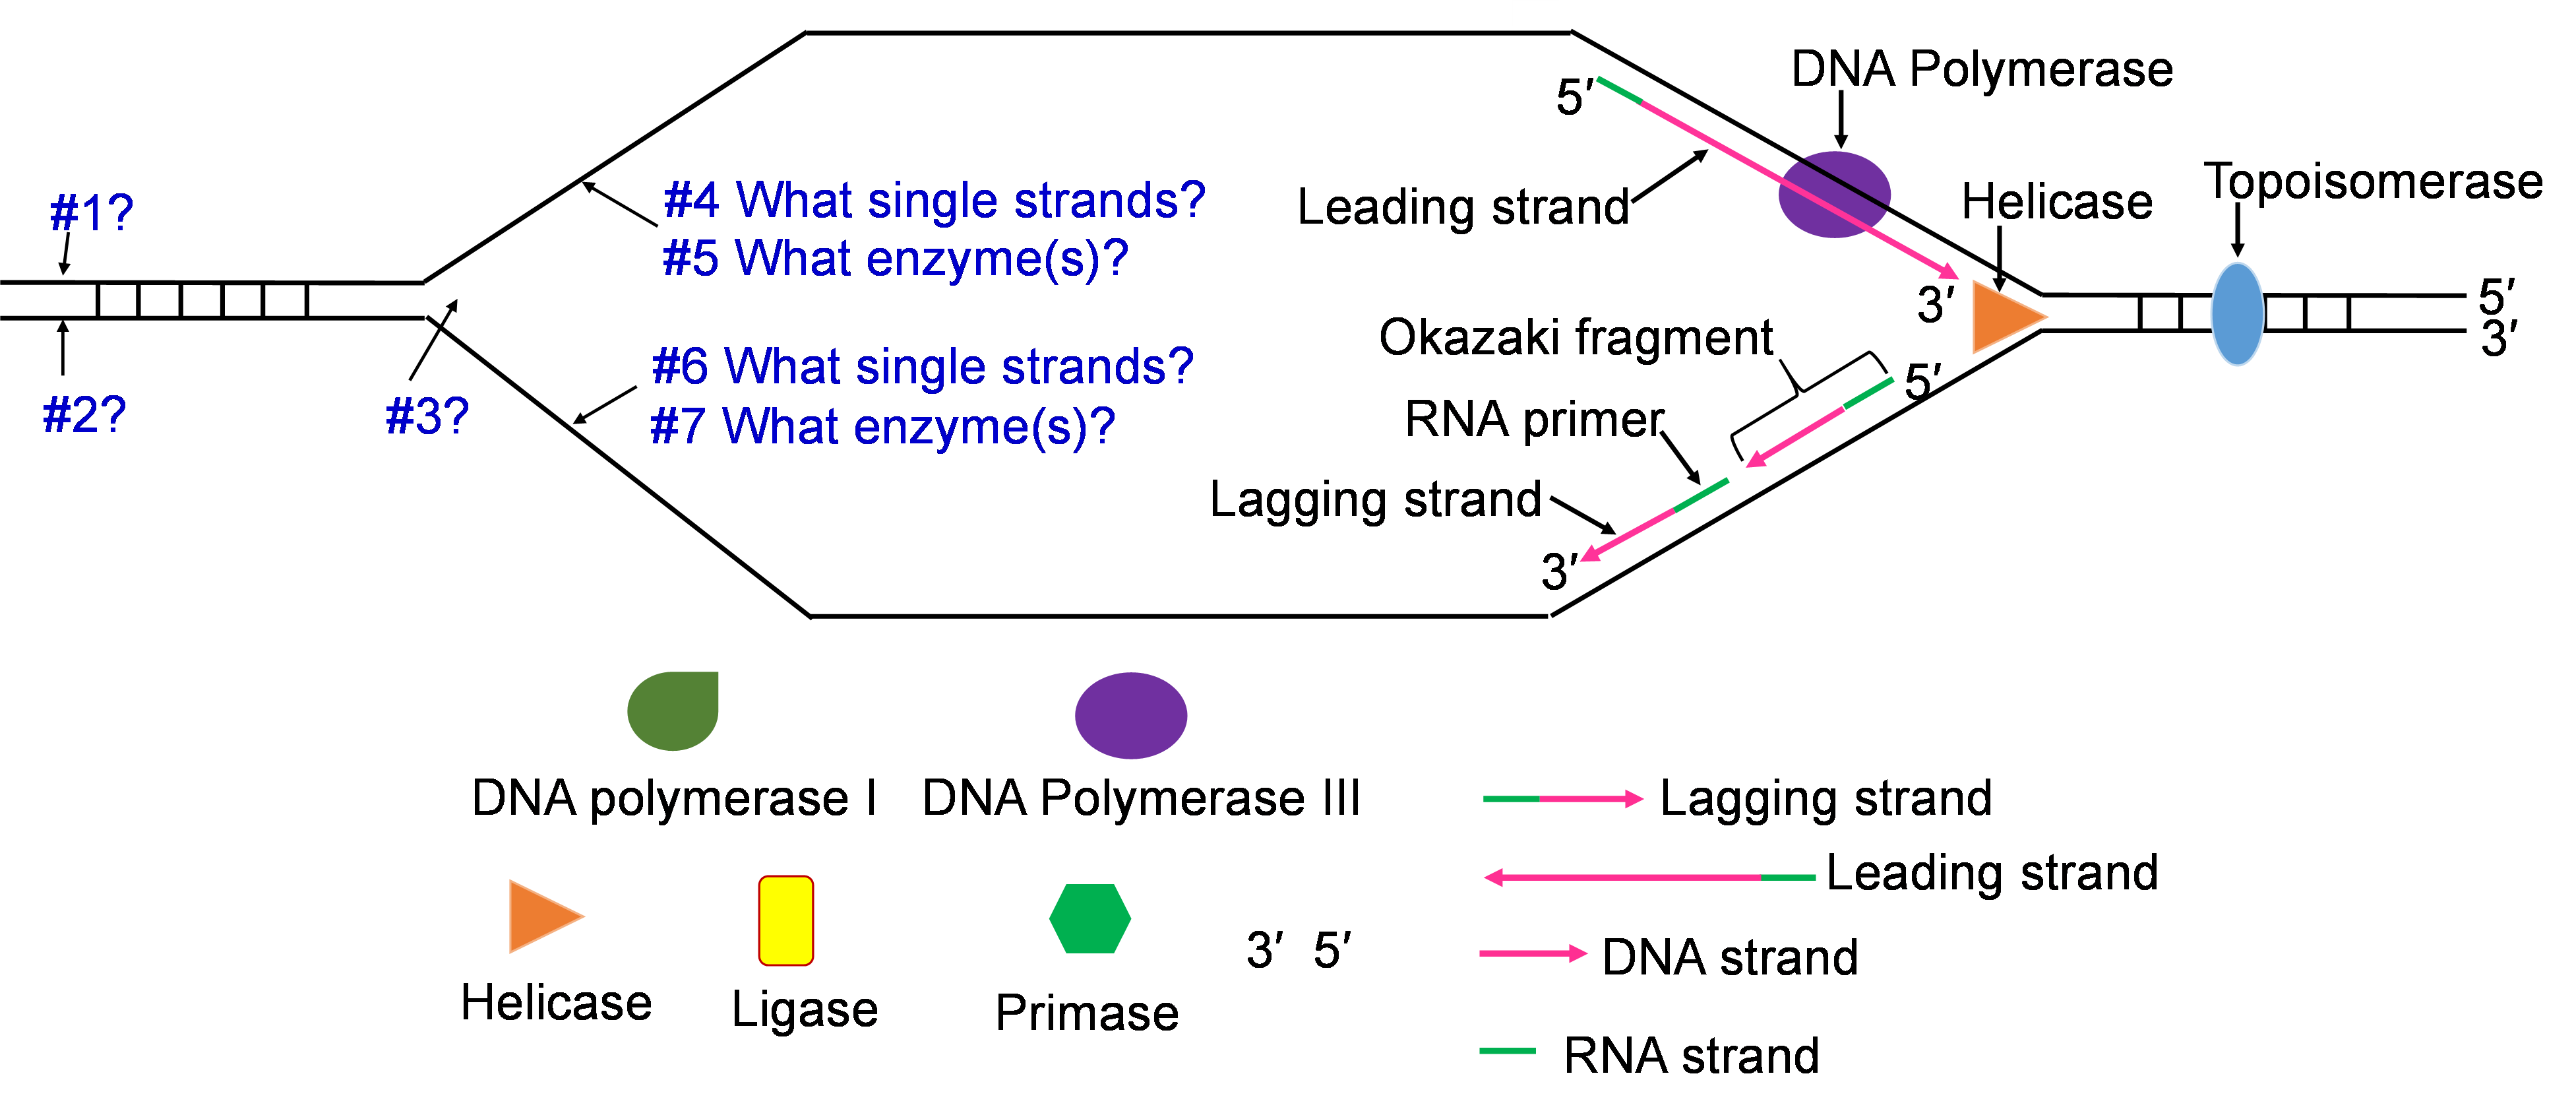 On the left, there is #1 on the top line of the strand and #2 on the bottom line. #3 is placed where the strand opens up into a funnel. #4 asks what single strands are on the top line. #5 asks what enzymes are on the top line. #6 asks what single strands are on the bottom line. #7 asks what enzymes are on the bottom line. On the right, the leading strand is 5' to 3' with a DNA polymerase and Helicase opening the strand. The bottom strand is 3' to 5' with a lagging strand, RNA primer, and an Okazaki fragment. 